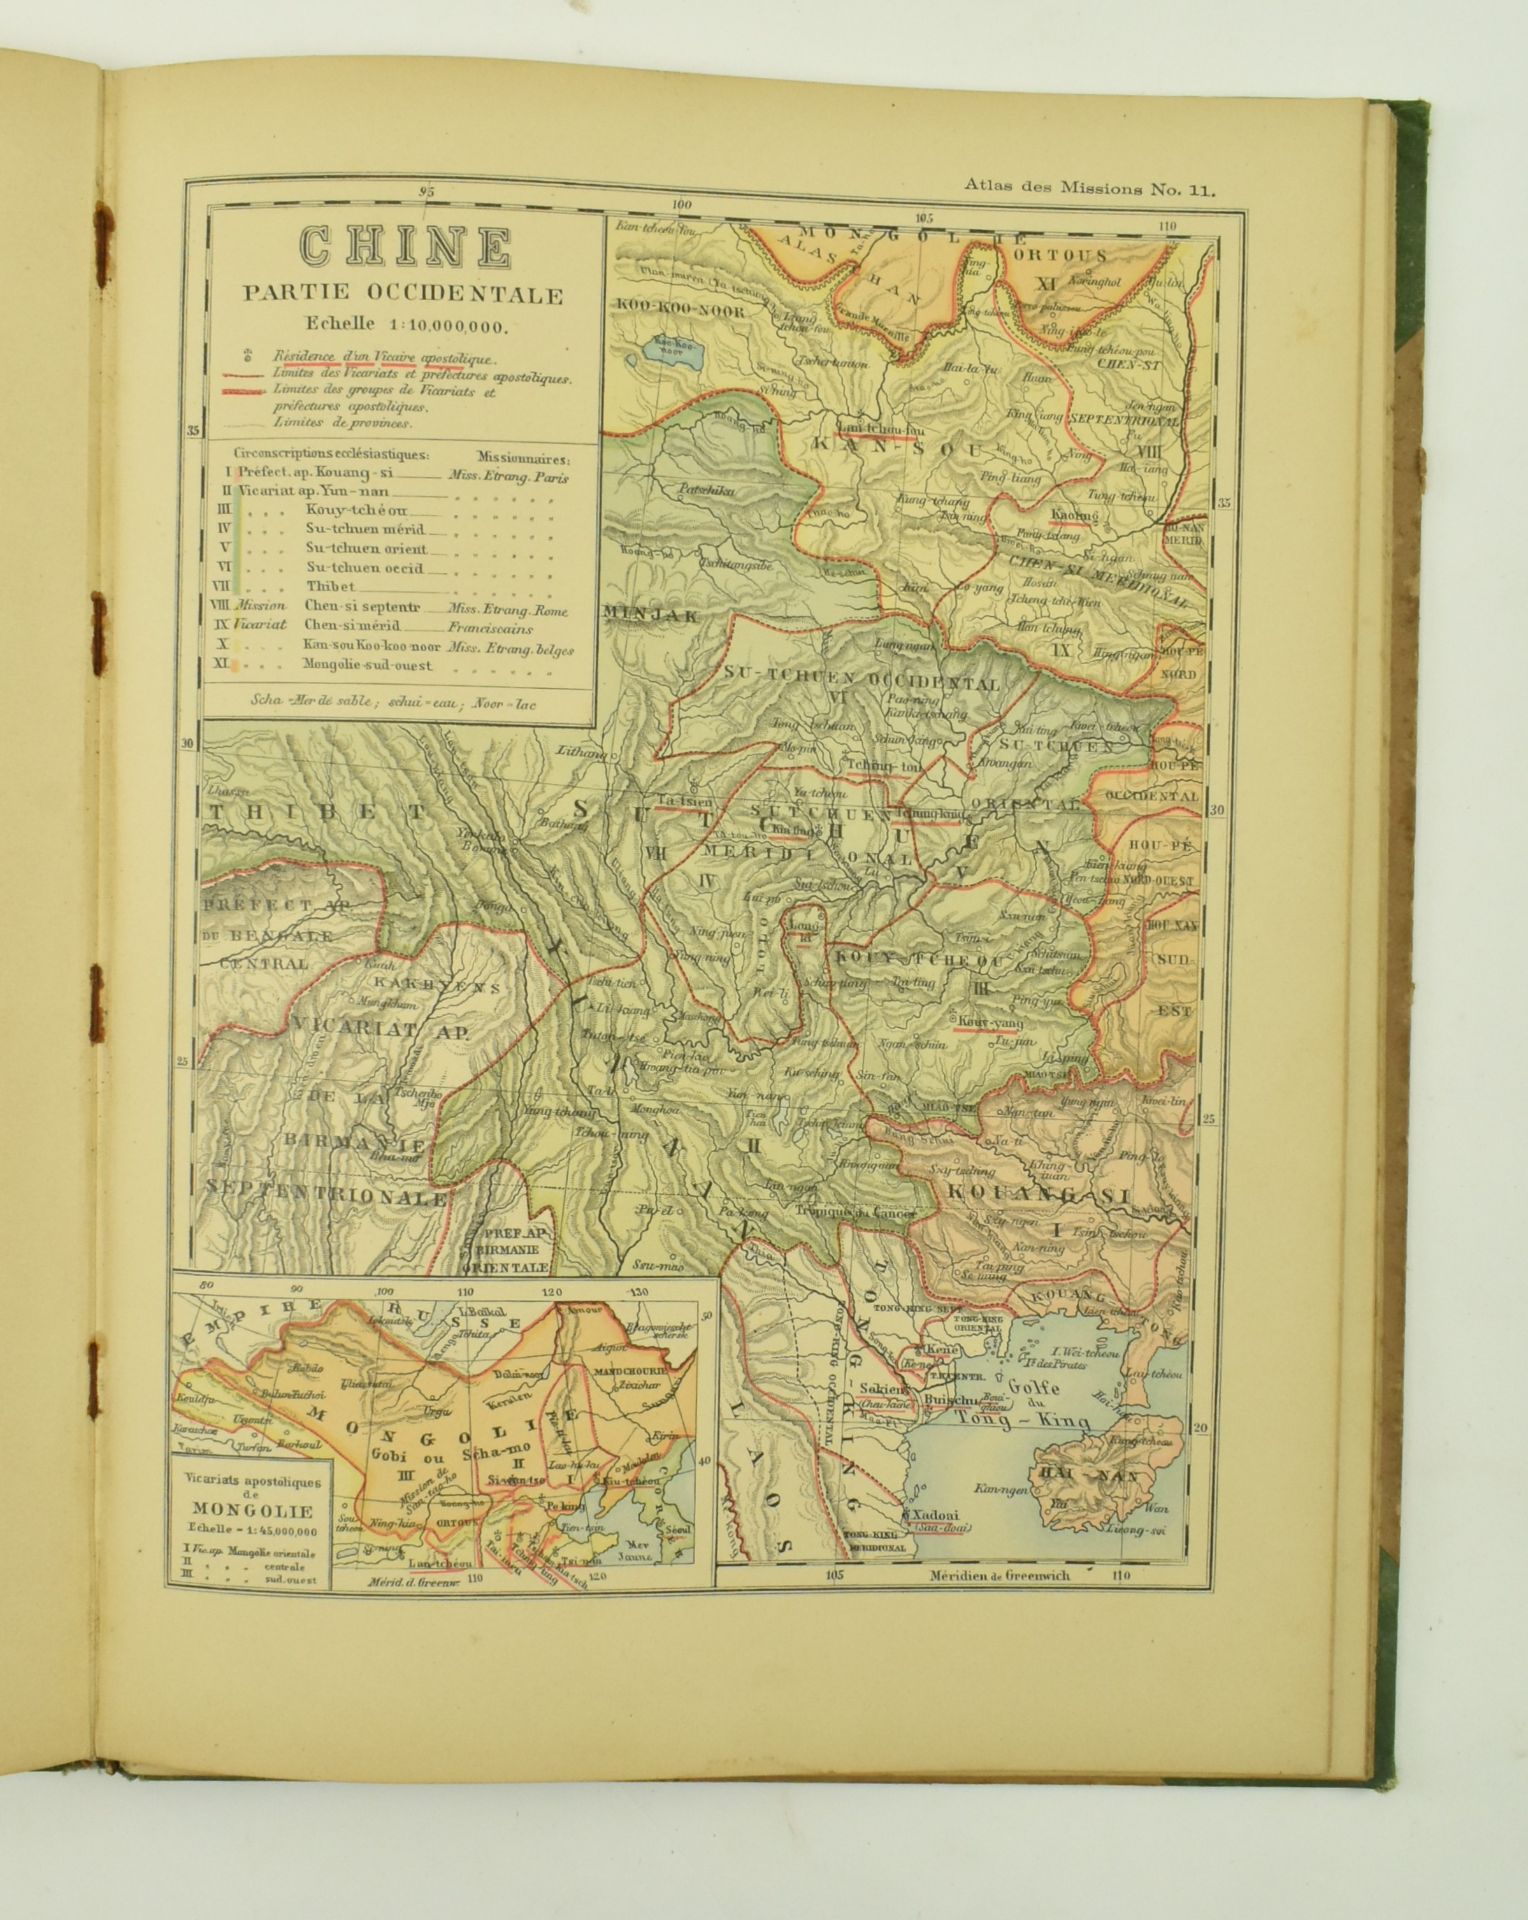 CARTOGRAPHY. TWO 19TH CENTURY FRENCH ATLASES - Image 10 of 10